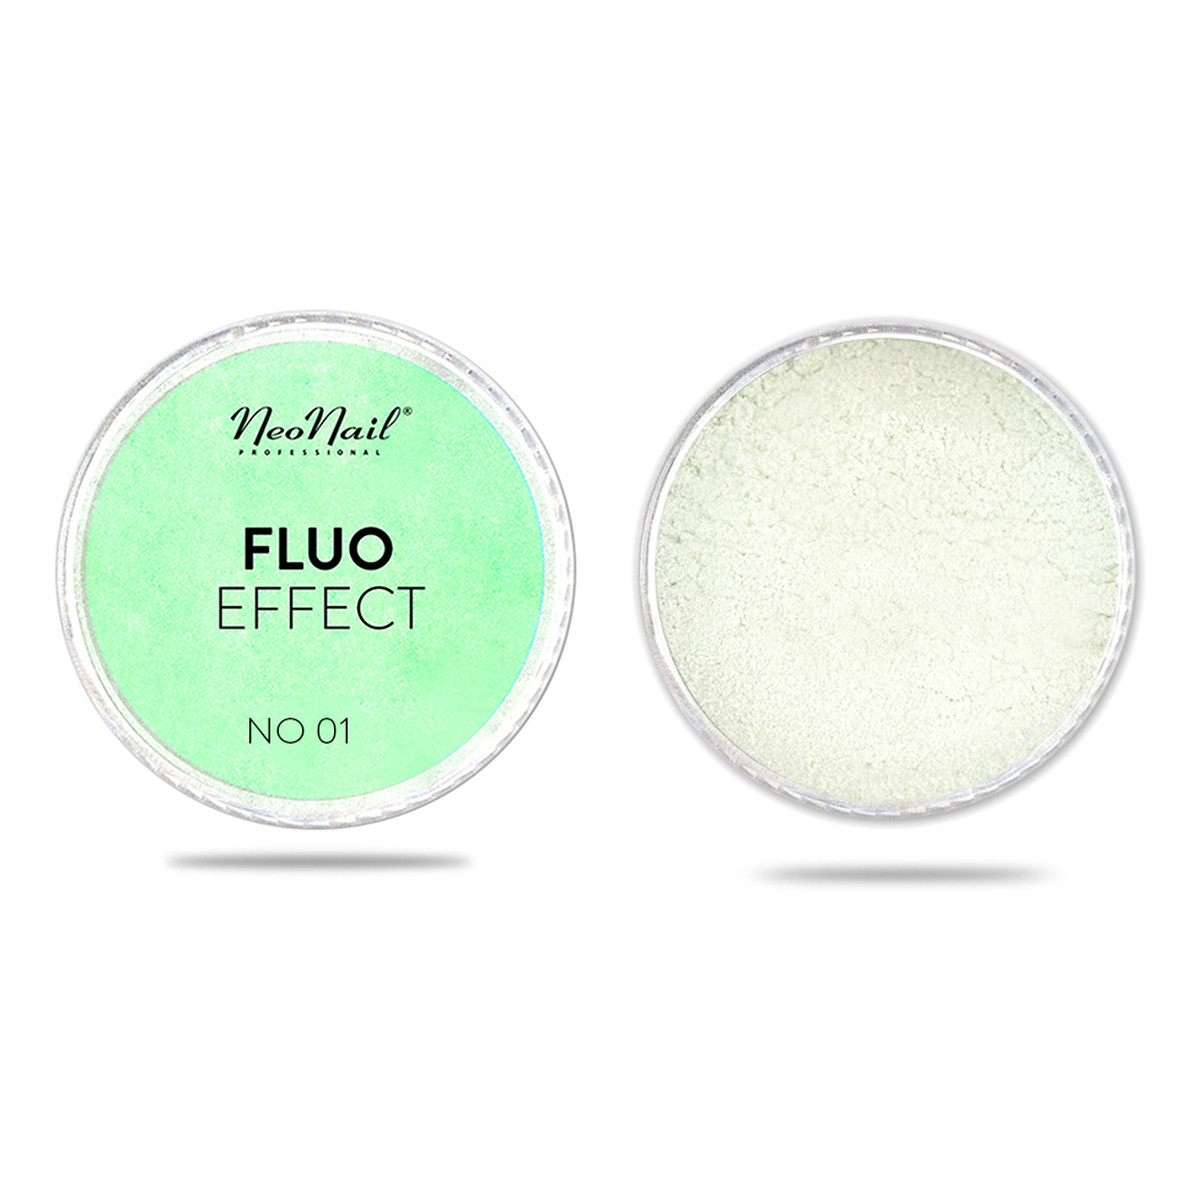 NeoNail Puder Fluo Effect 3g